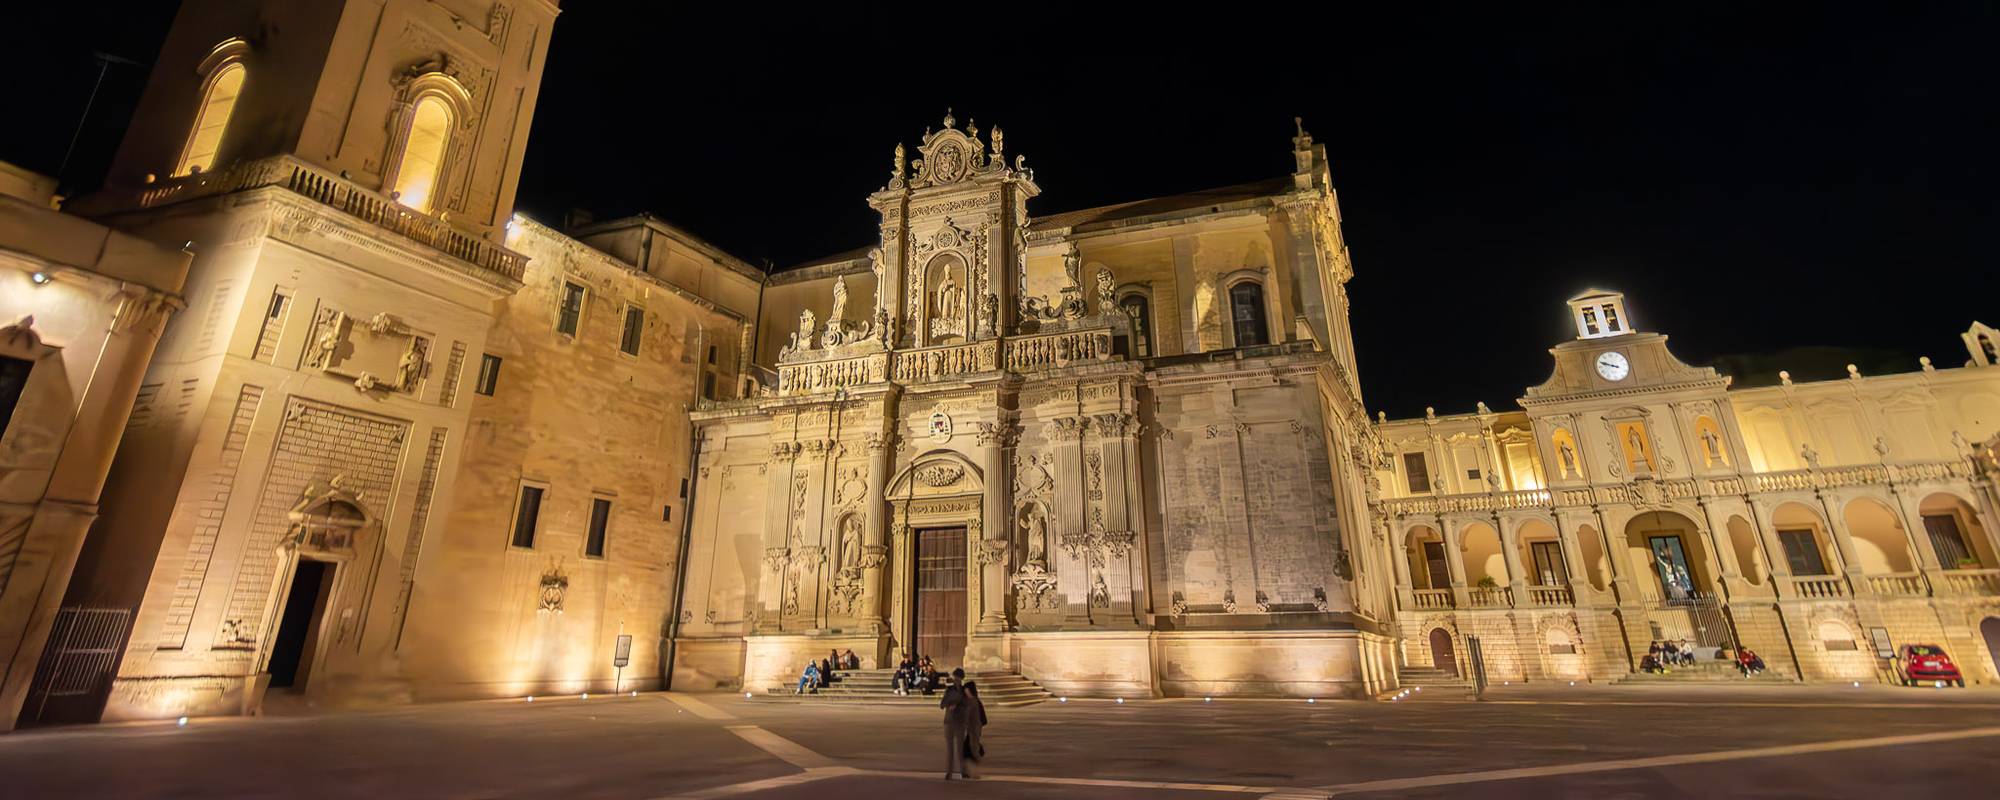 Top 10 Things to Do in Lecce, Italy